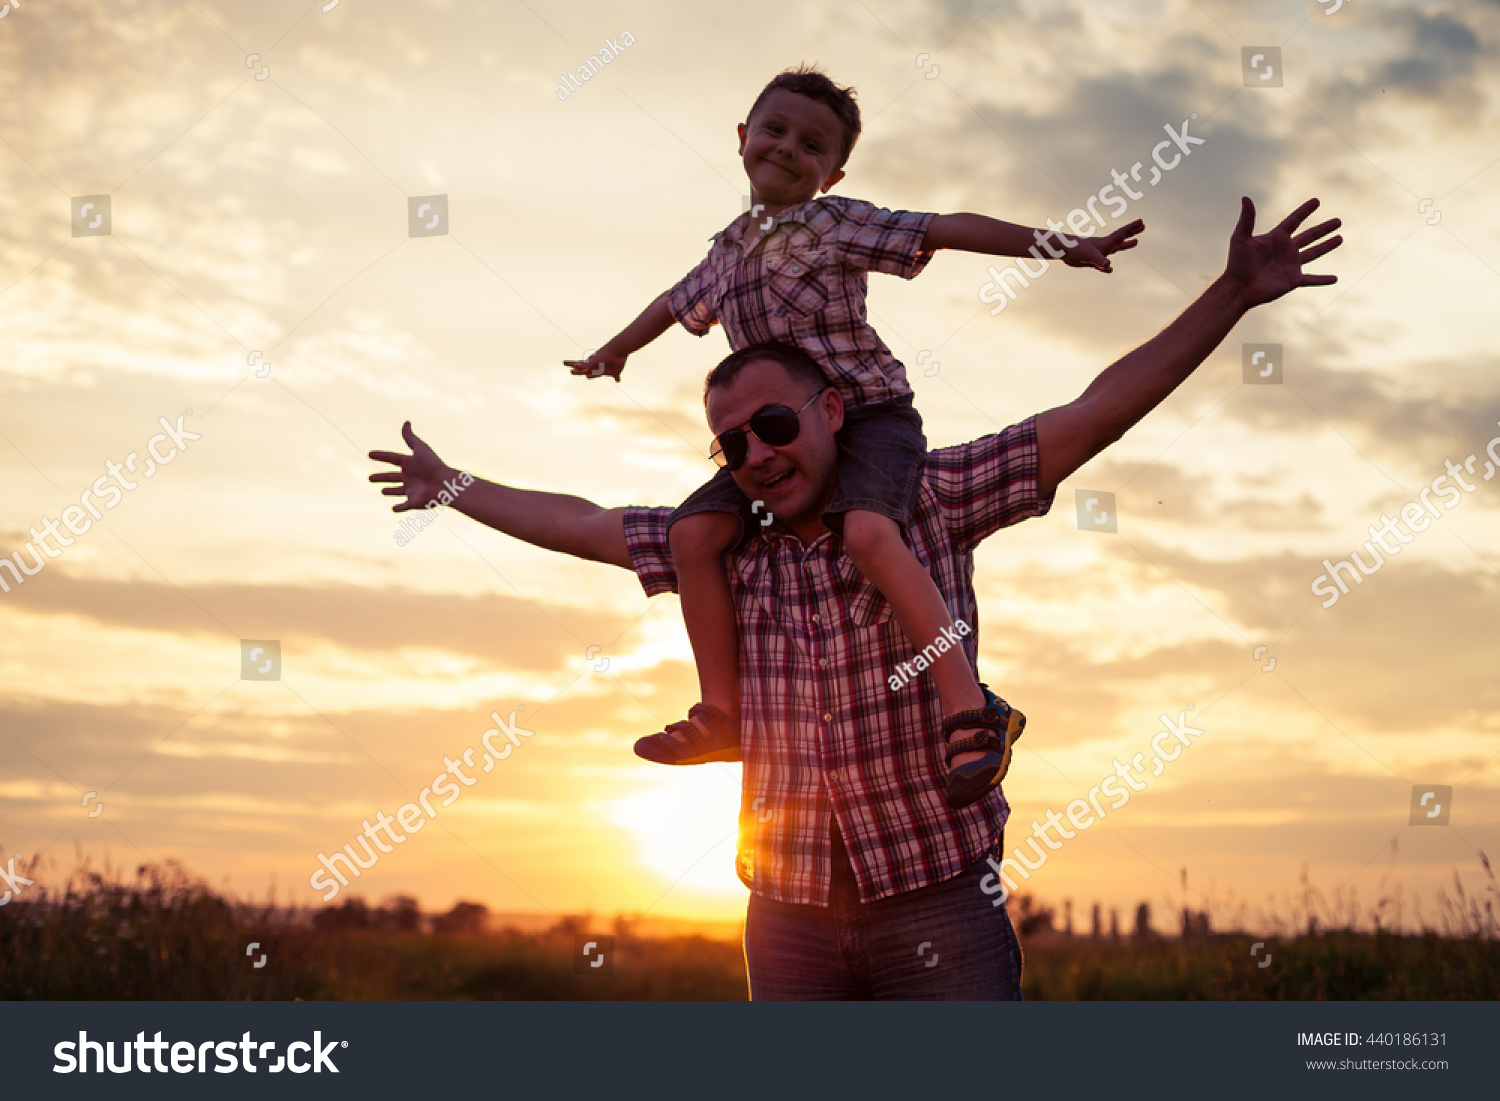 Father and son playing at the park at the sunset time. People having fun on the field. Concept of friendship forever and of summer vacation. #440186131